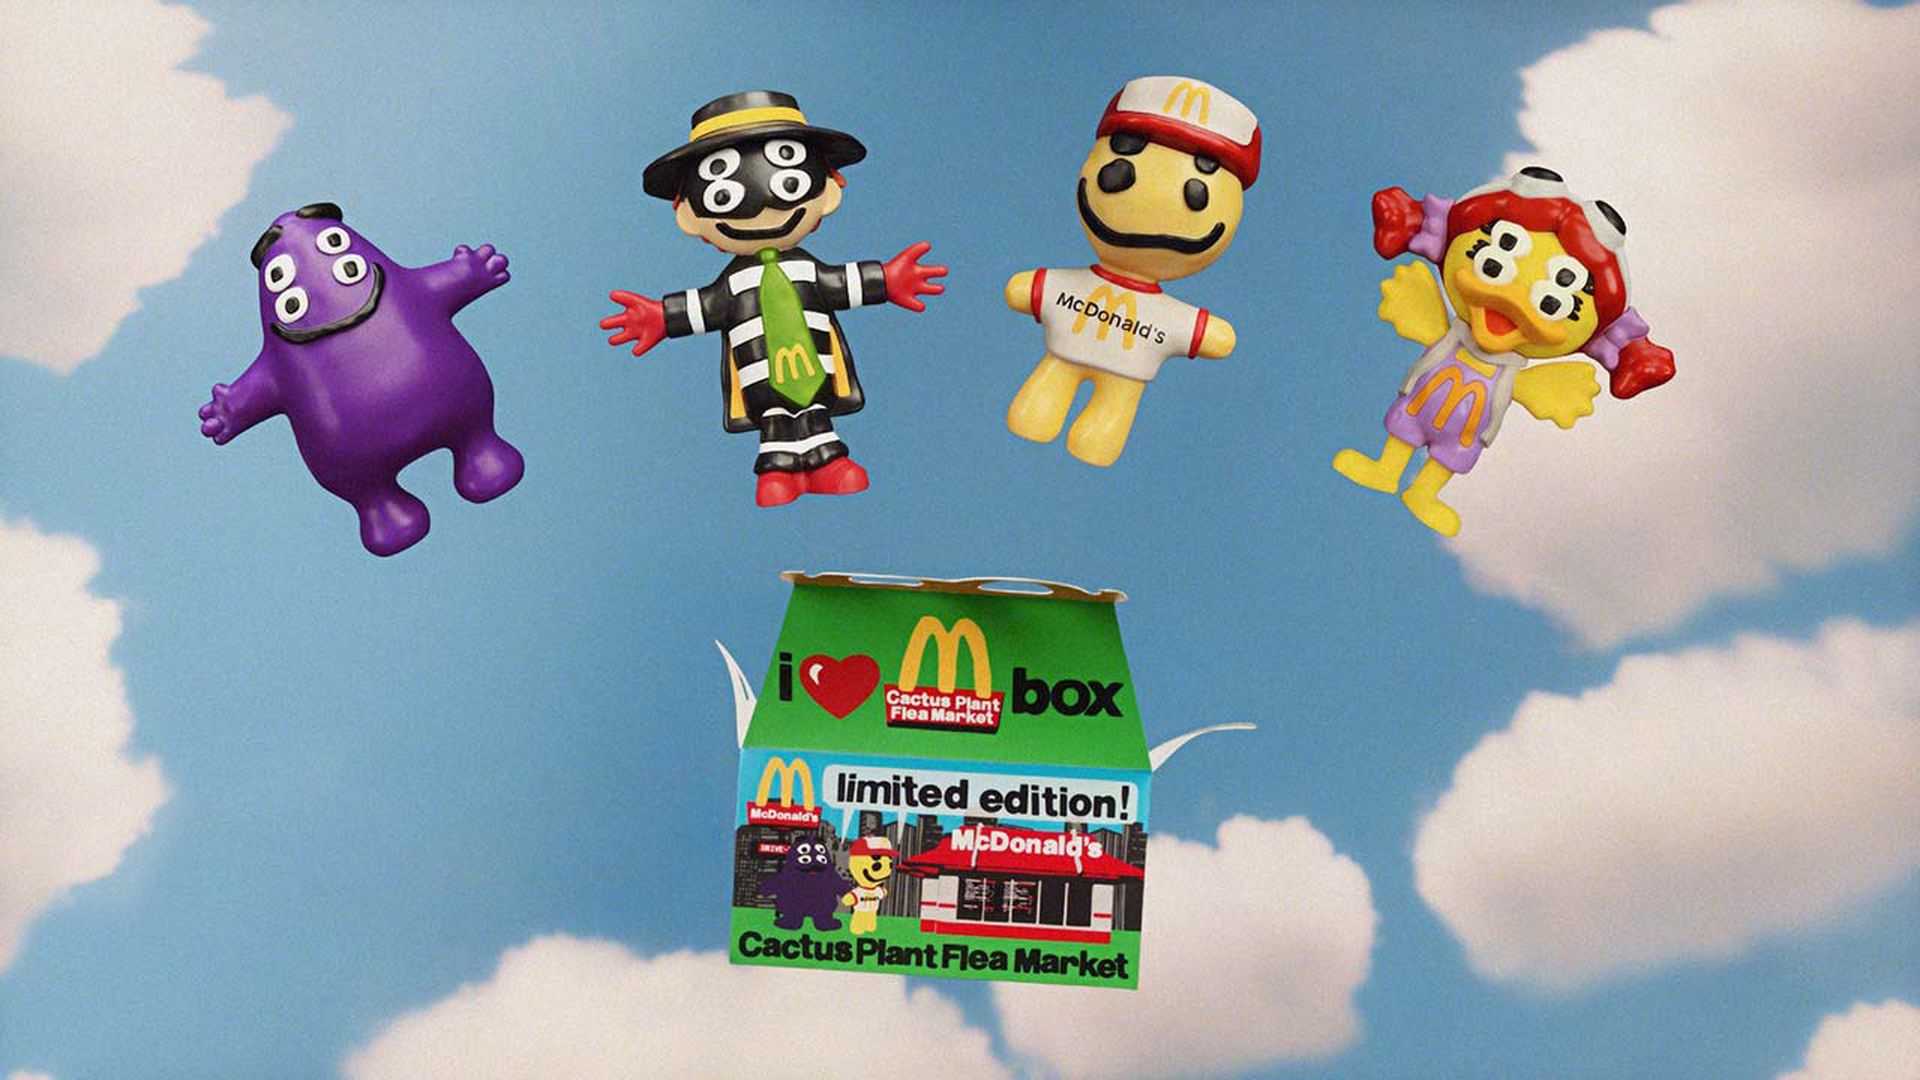 juni Feest Gevestigde theorie McDonald's adult Happy Meal with Cactus Plant Flea Market toys release today